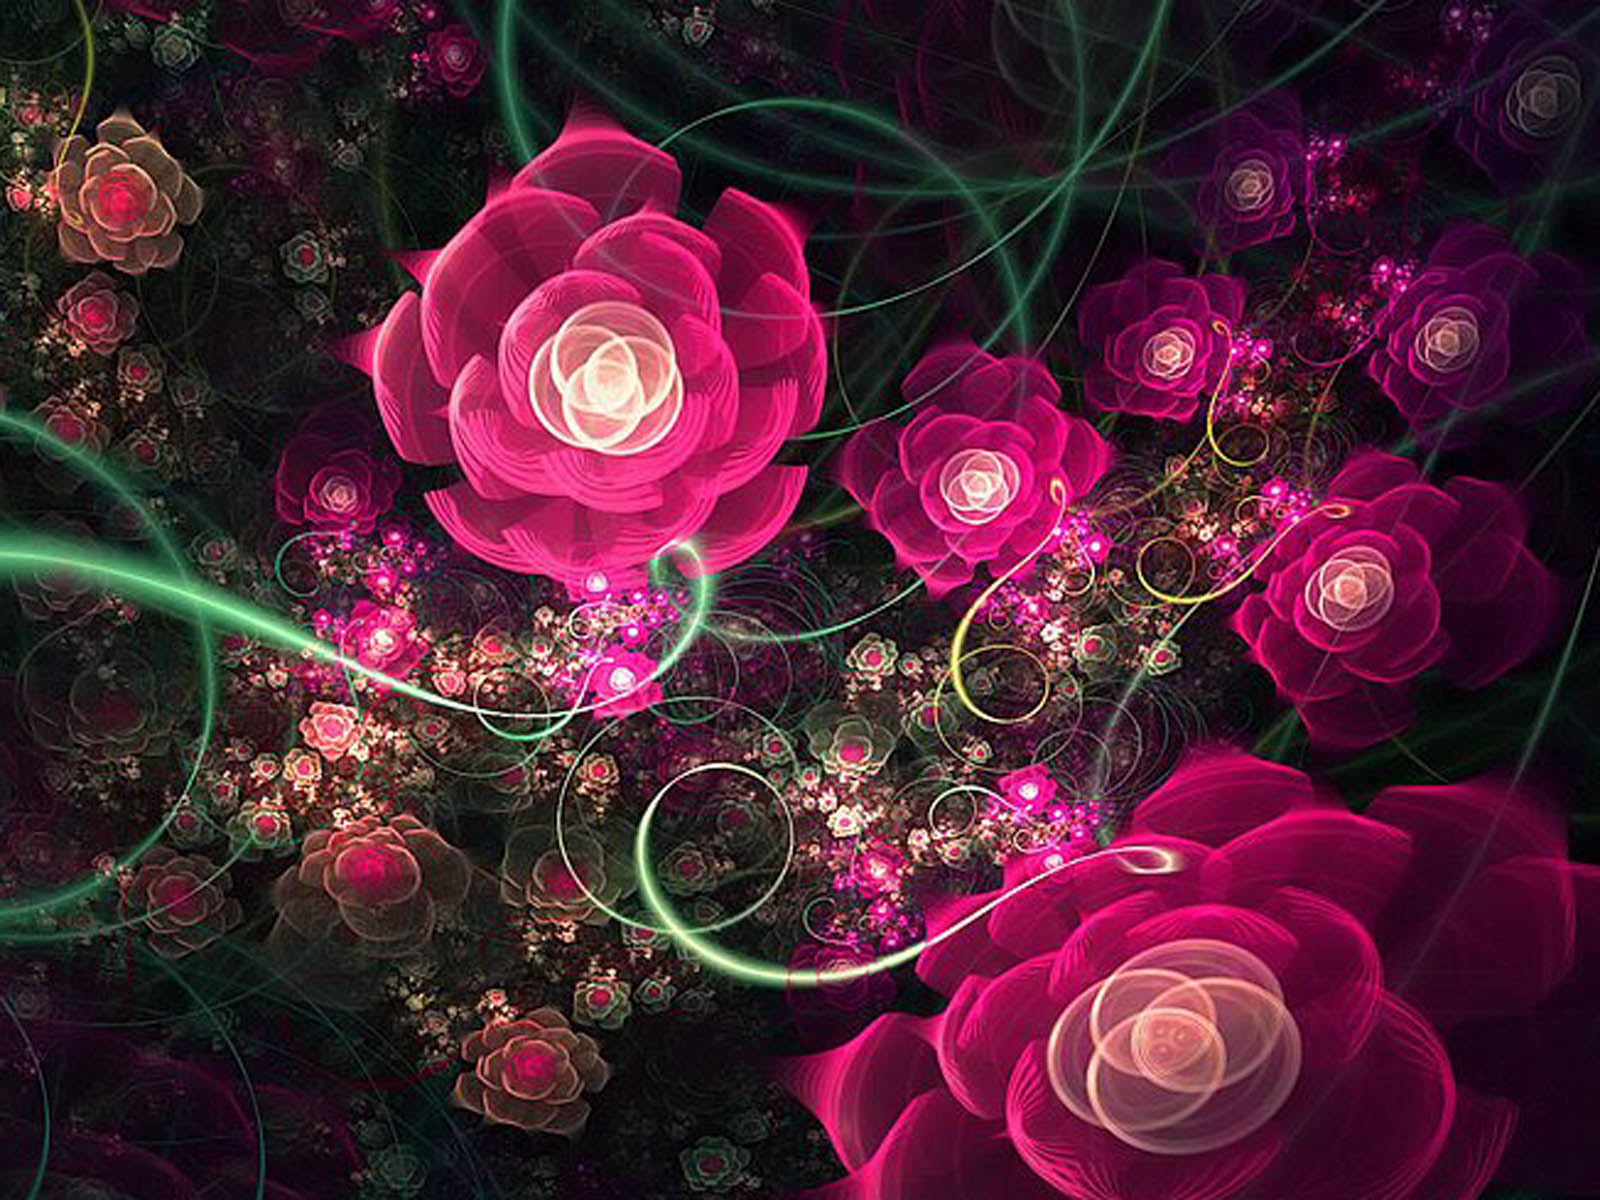 Tag Fractal Art Wallpapers Backgrounds Photos Pictures and Images 1600x1200